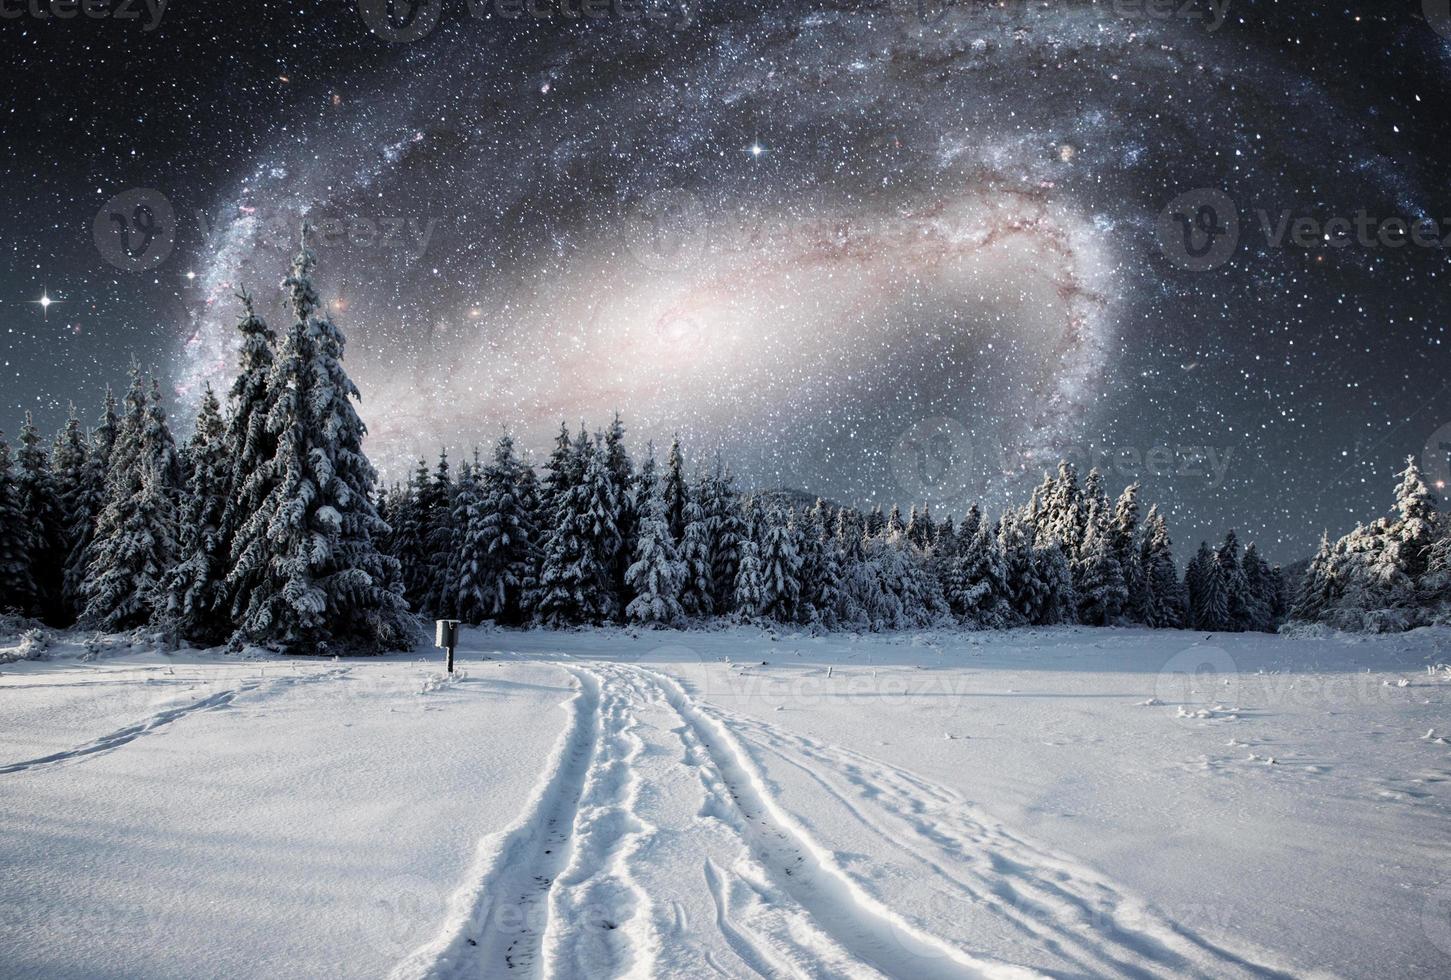 Majestic landscape with forest at winter night time with stars and galaxy in the sky. Scenery background. Elements furnished by NASA photo